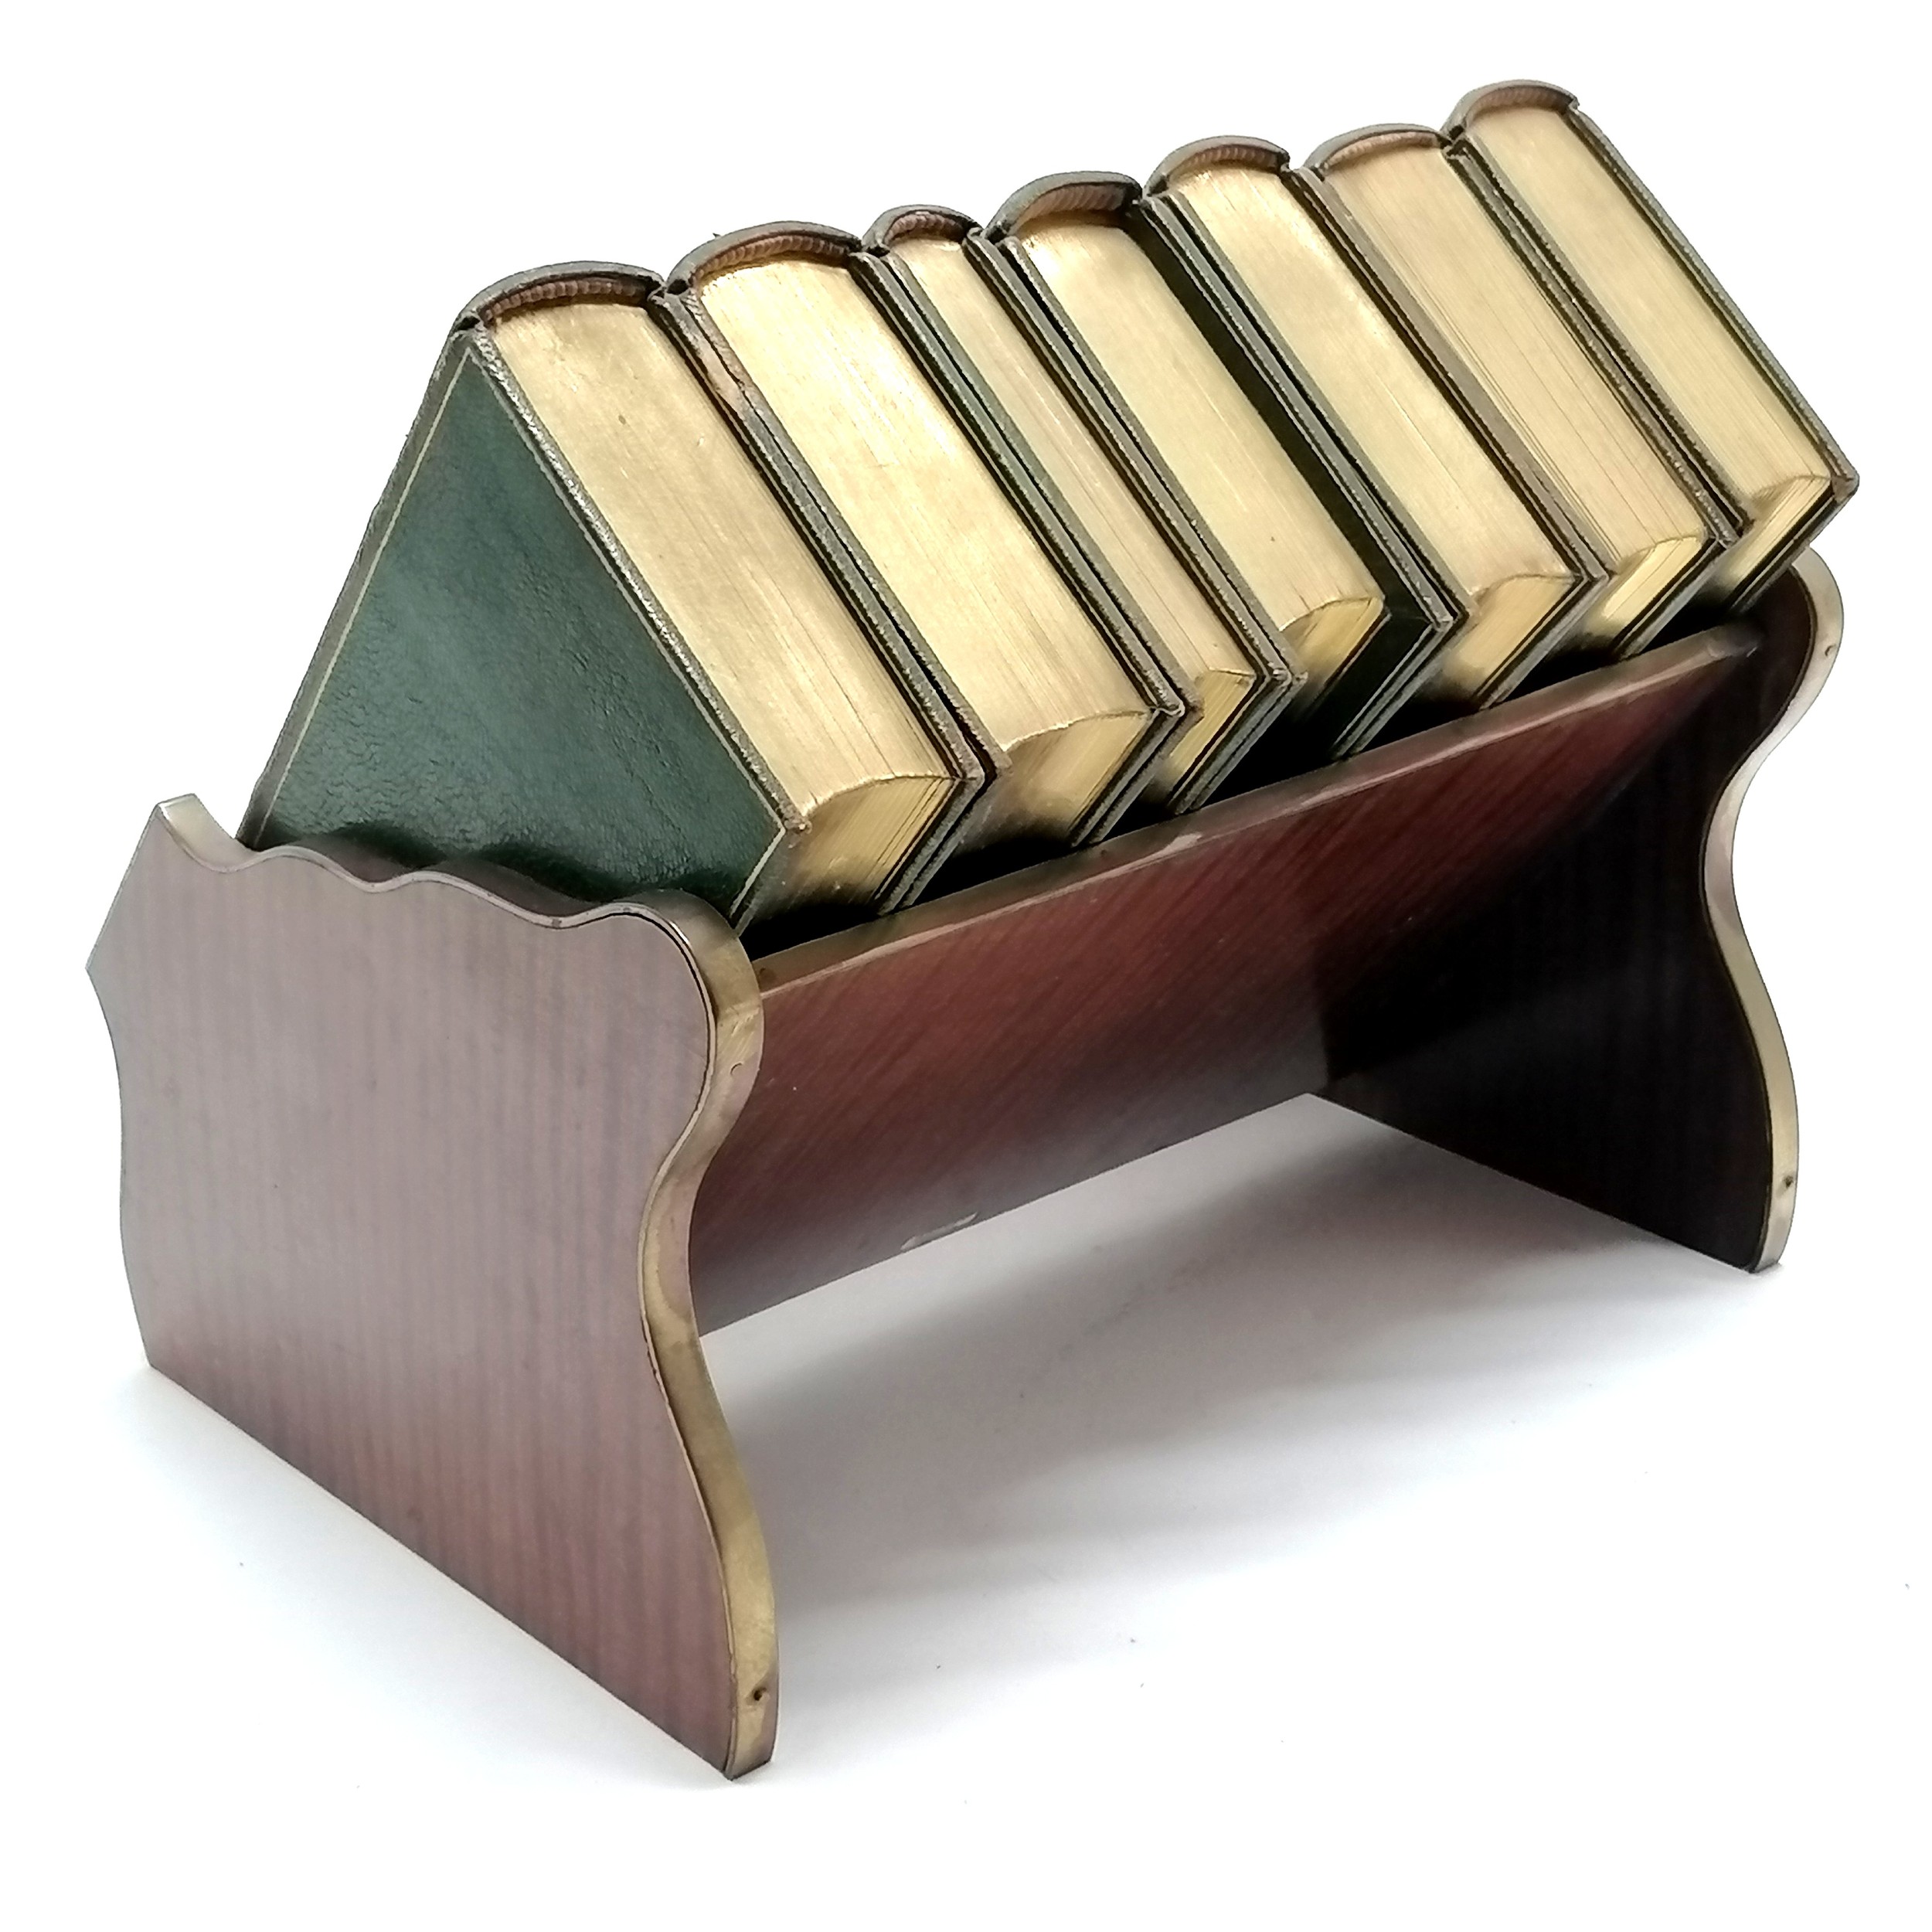 Aspreys partridge wood & brass mounted bookstand with original Aspreys green leather bound reference - Image 2 of 5